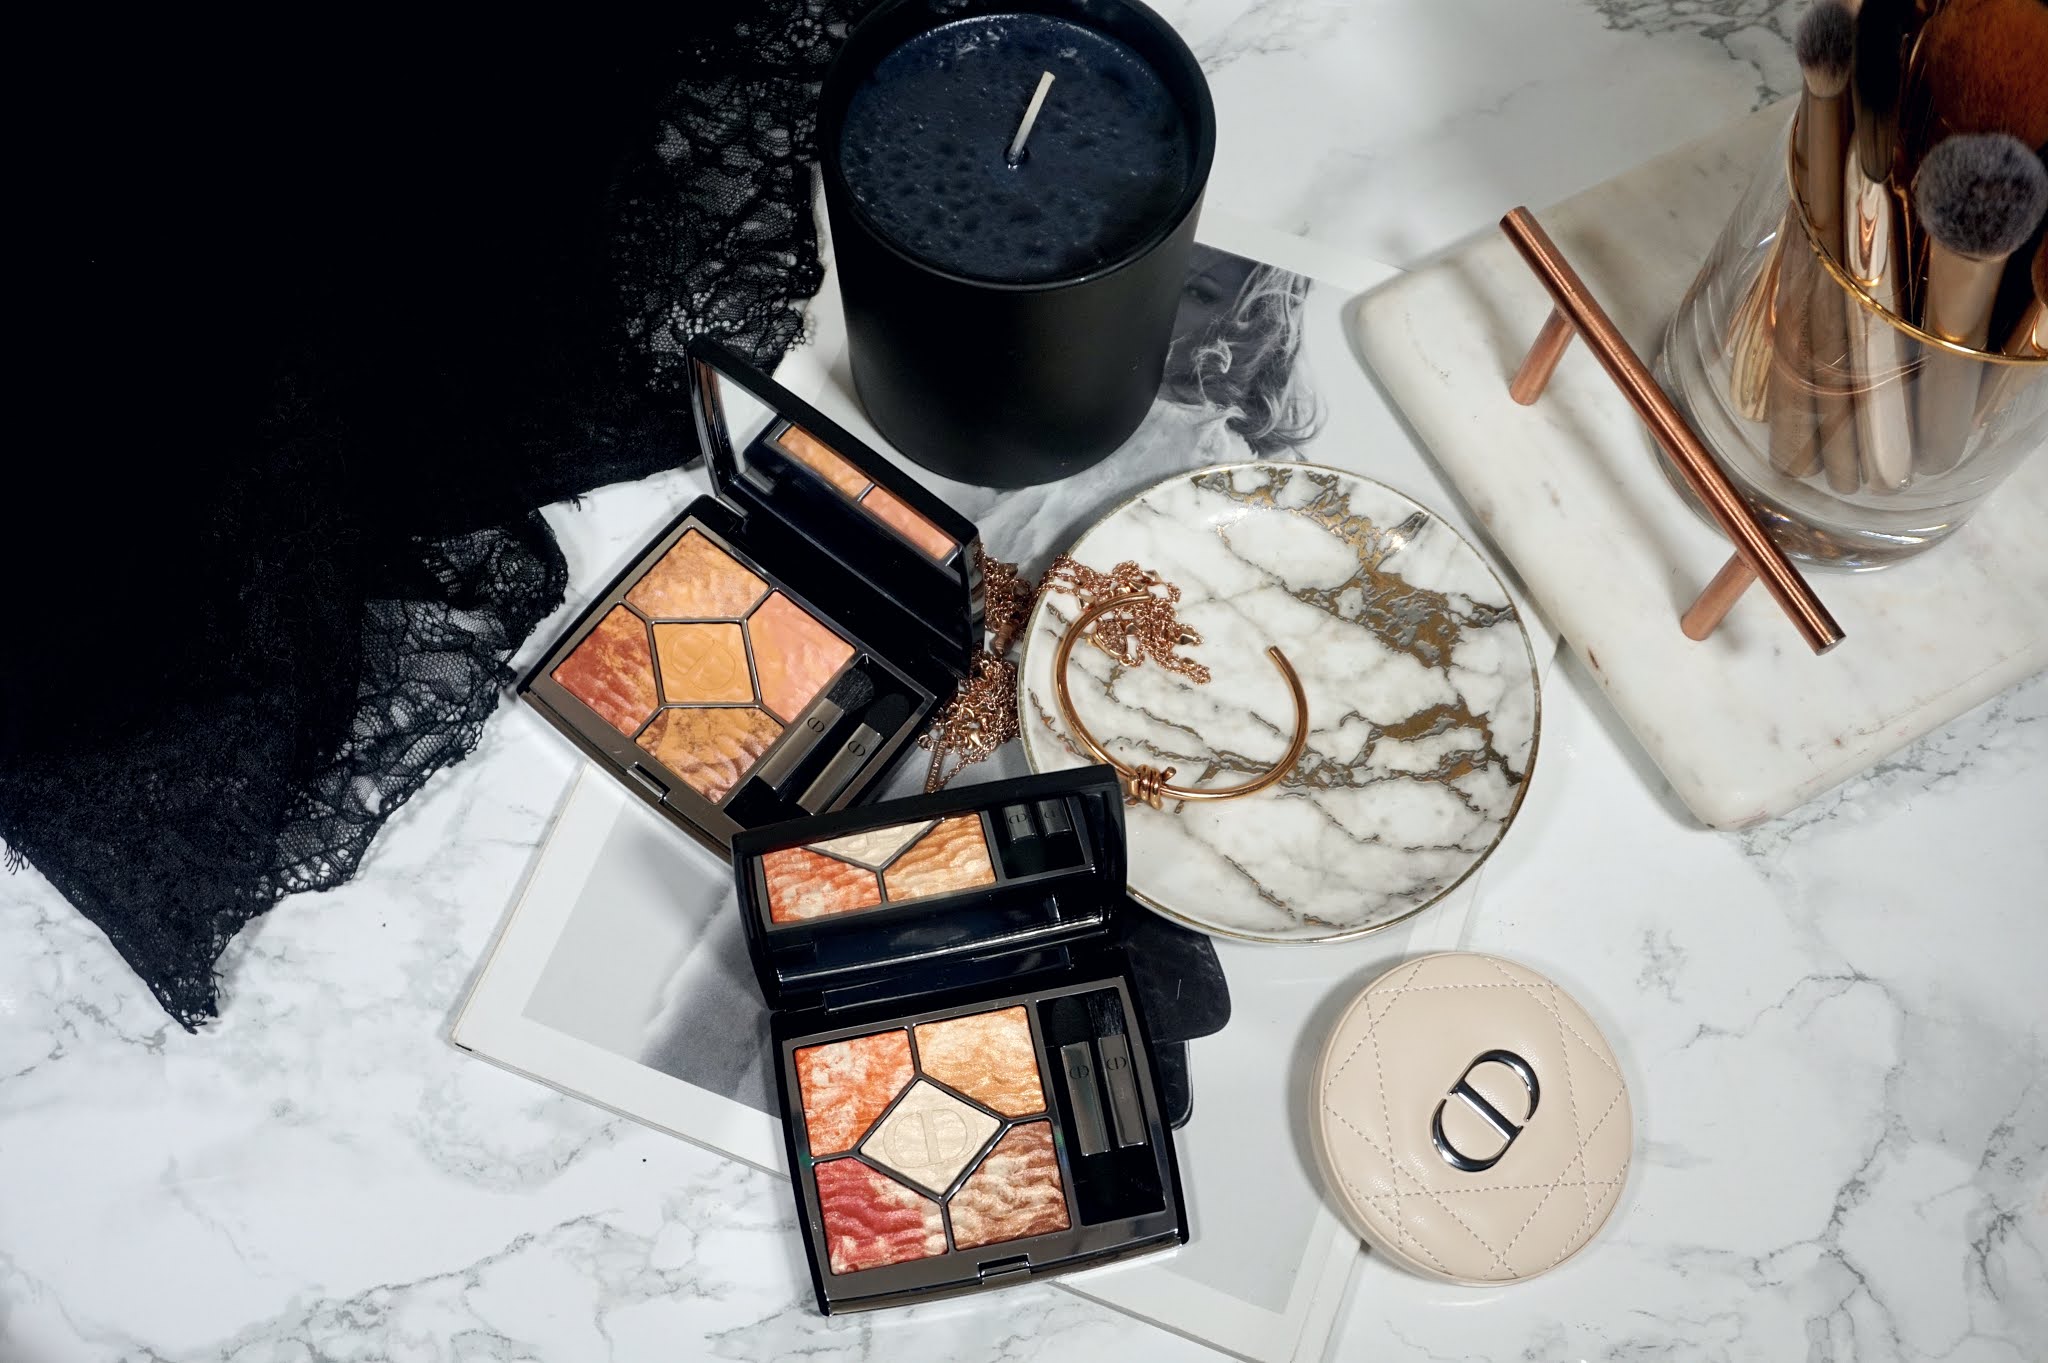 My 5 Fave CHANEL Palettes